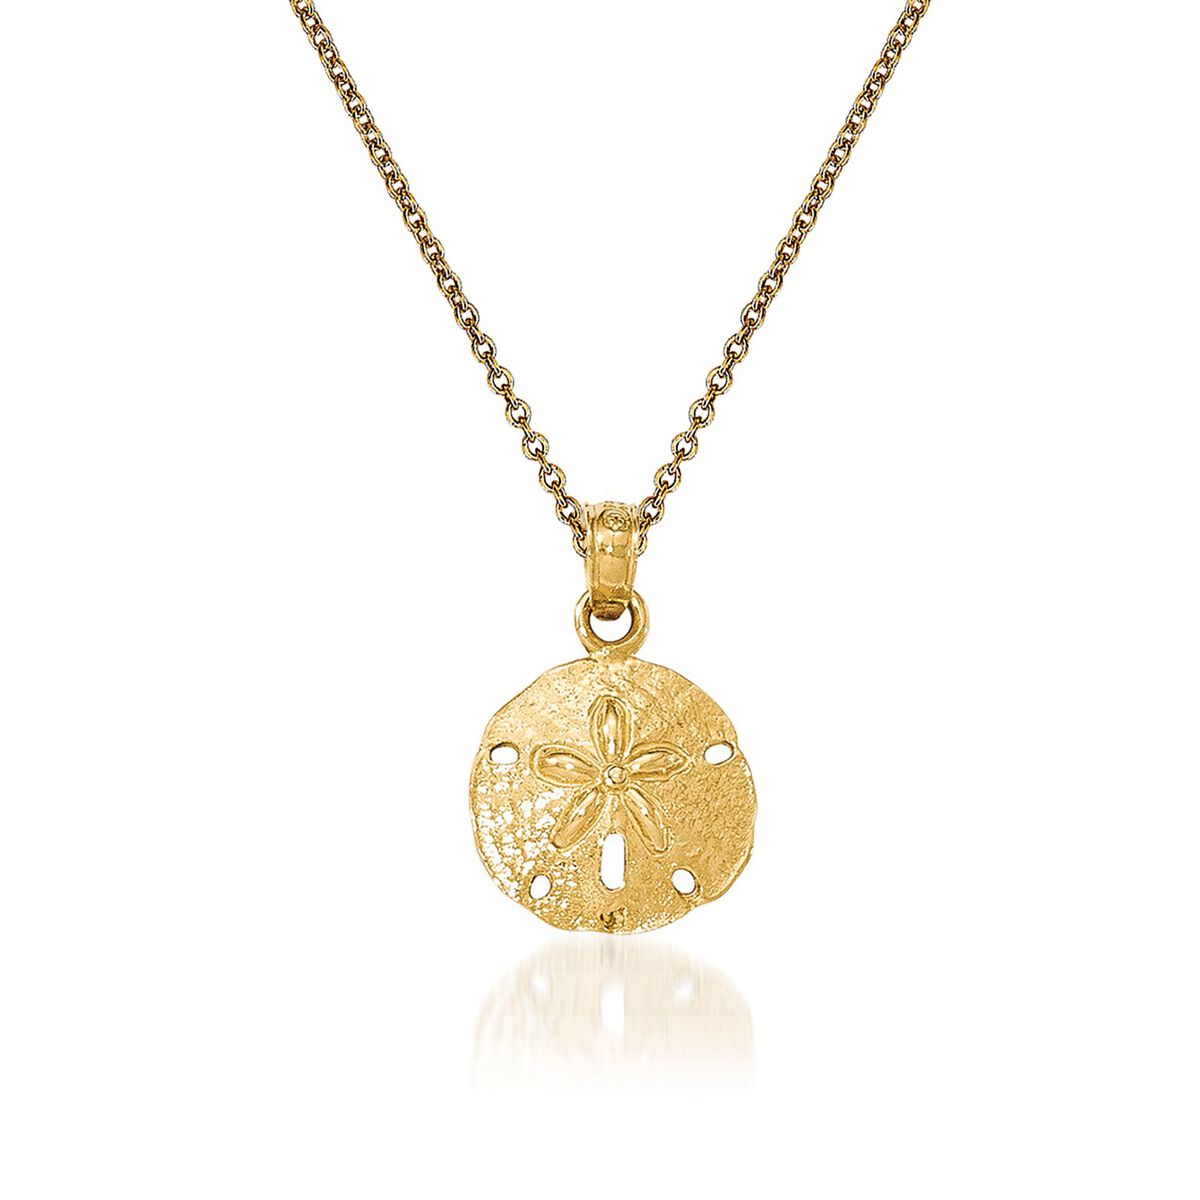 Details about   14K Yellow Gold 2-D Sand Dollar Charm Pendant MSRP $398